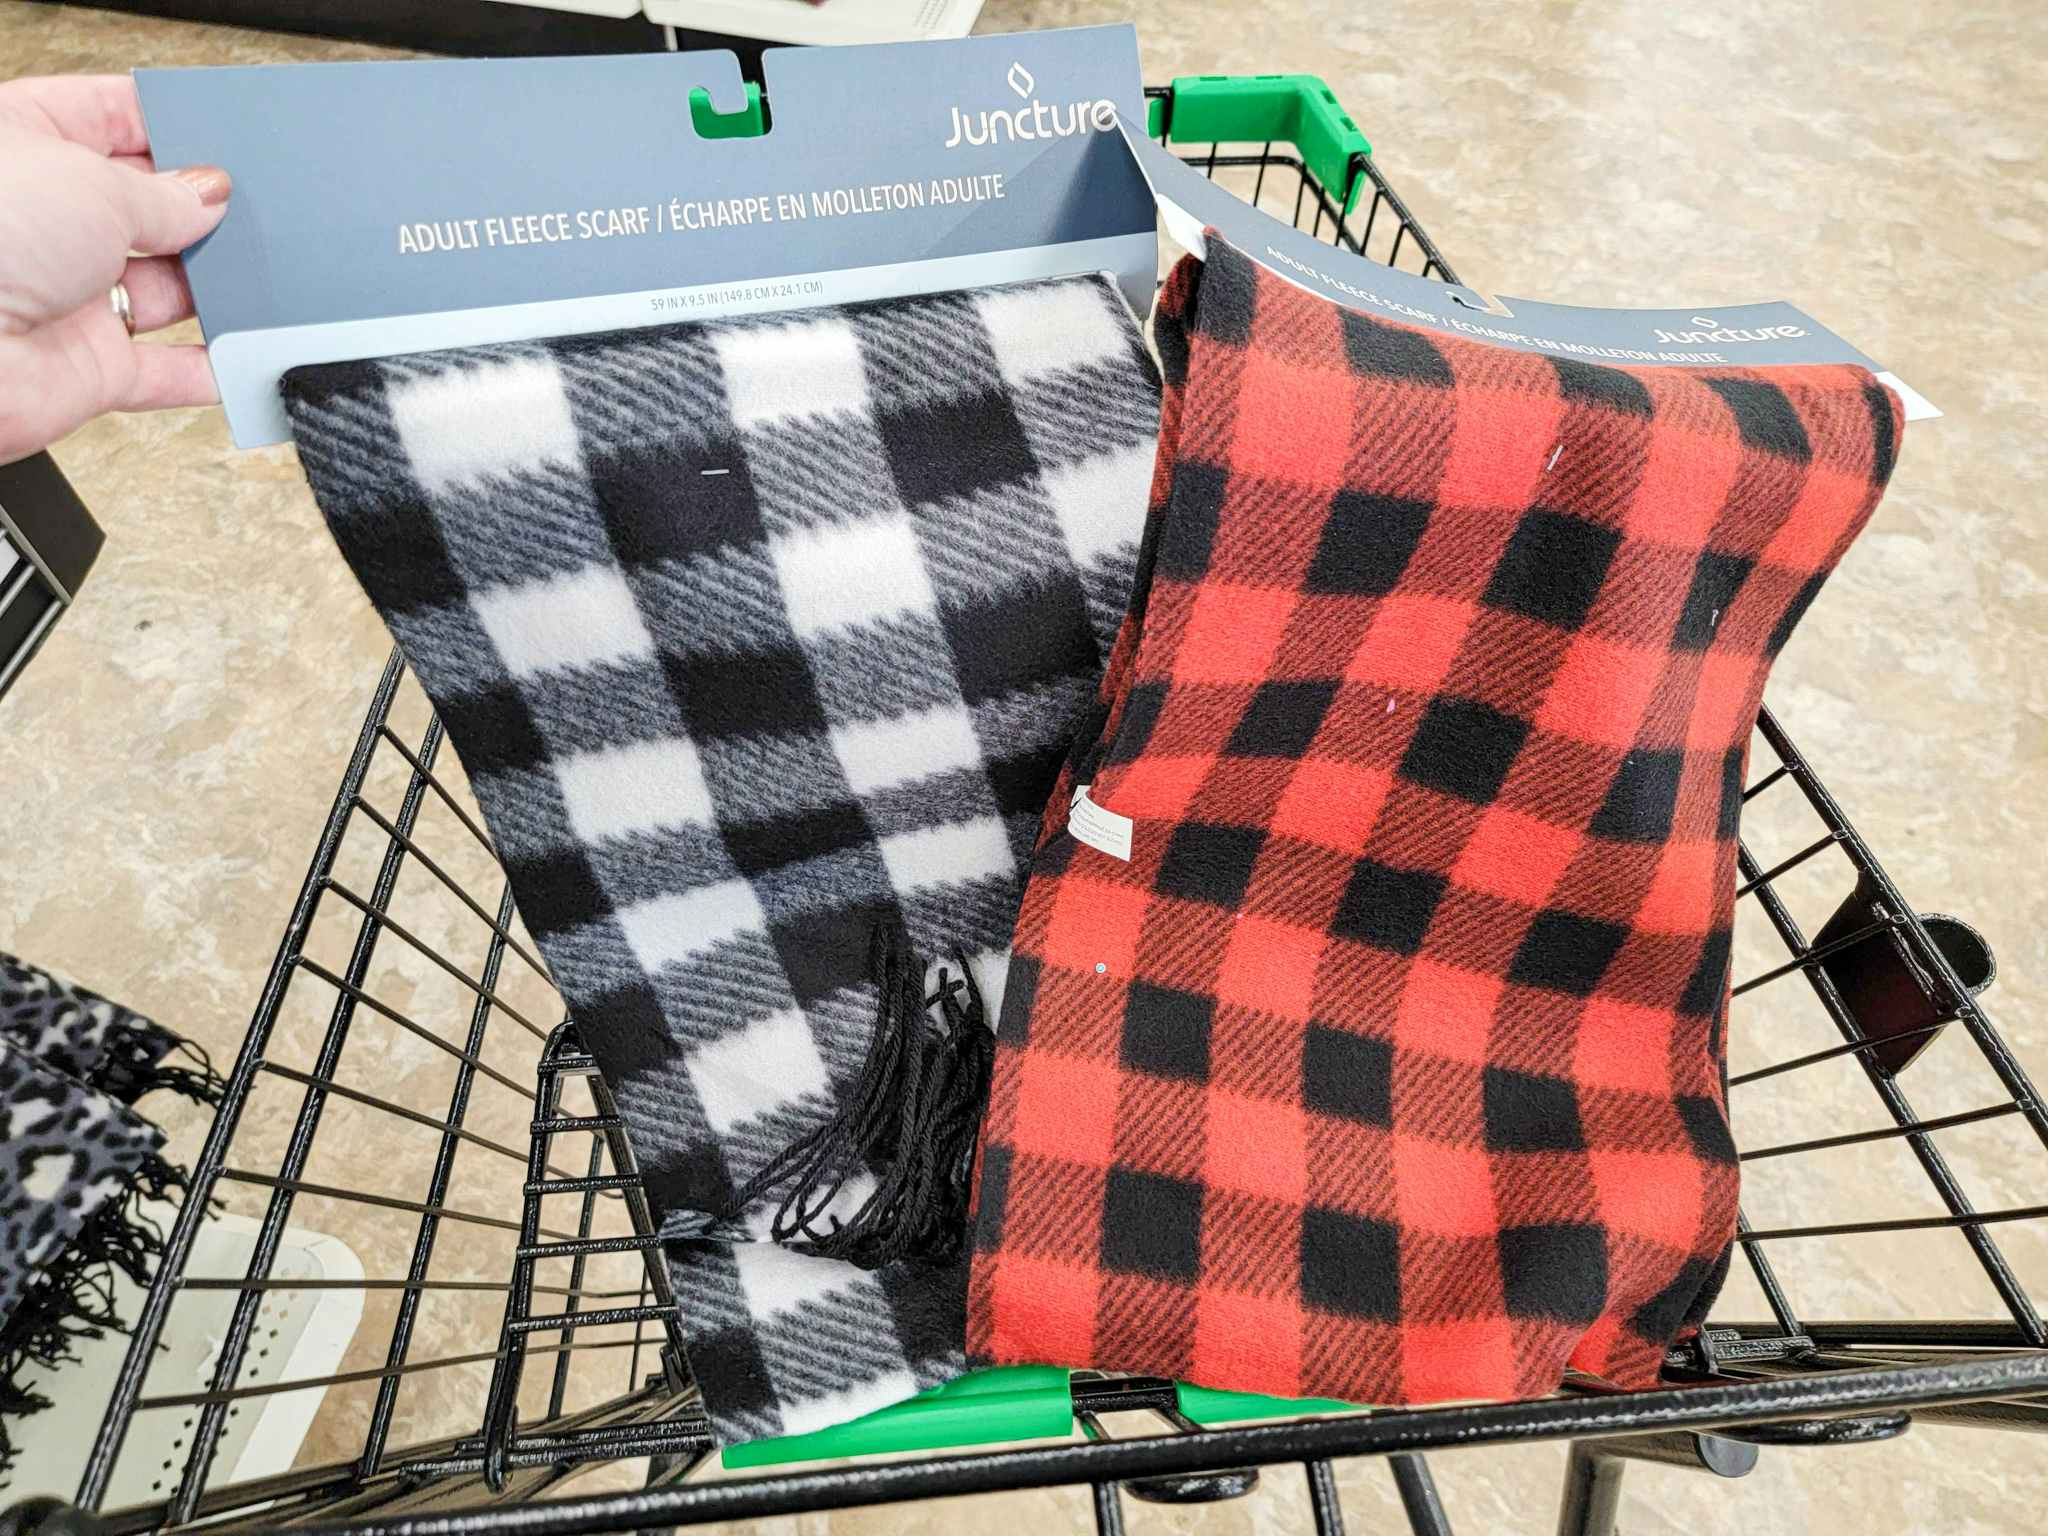 white & black buffalo plaid scarf with a red & black buffalo plaid scarf in a cart